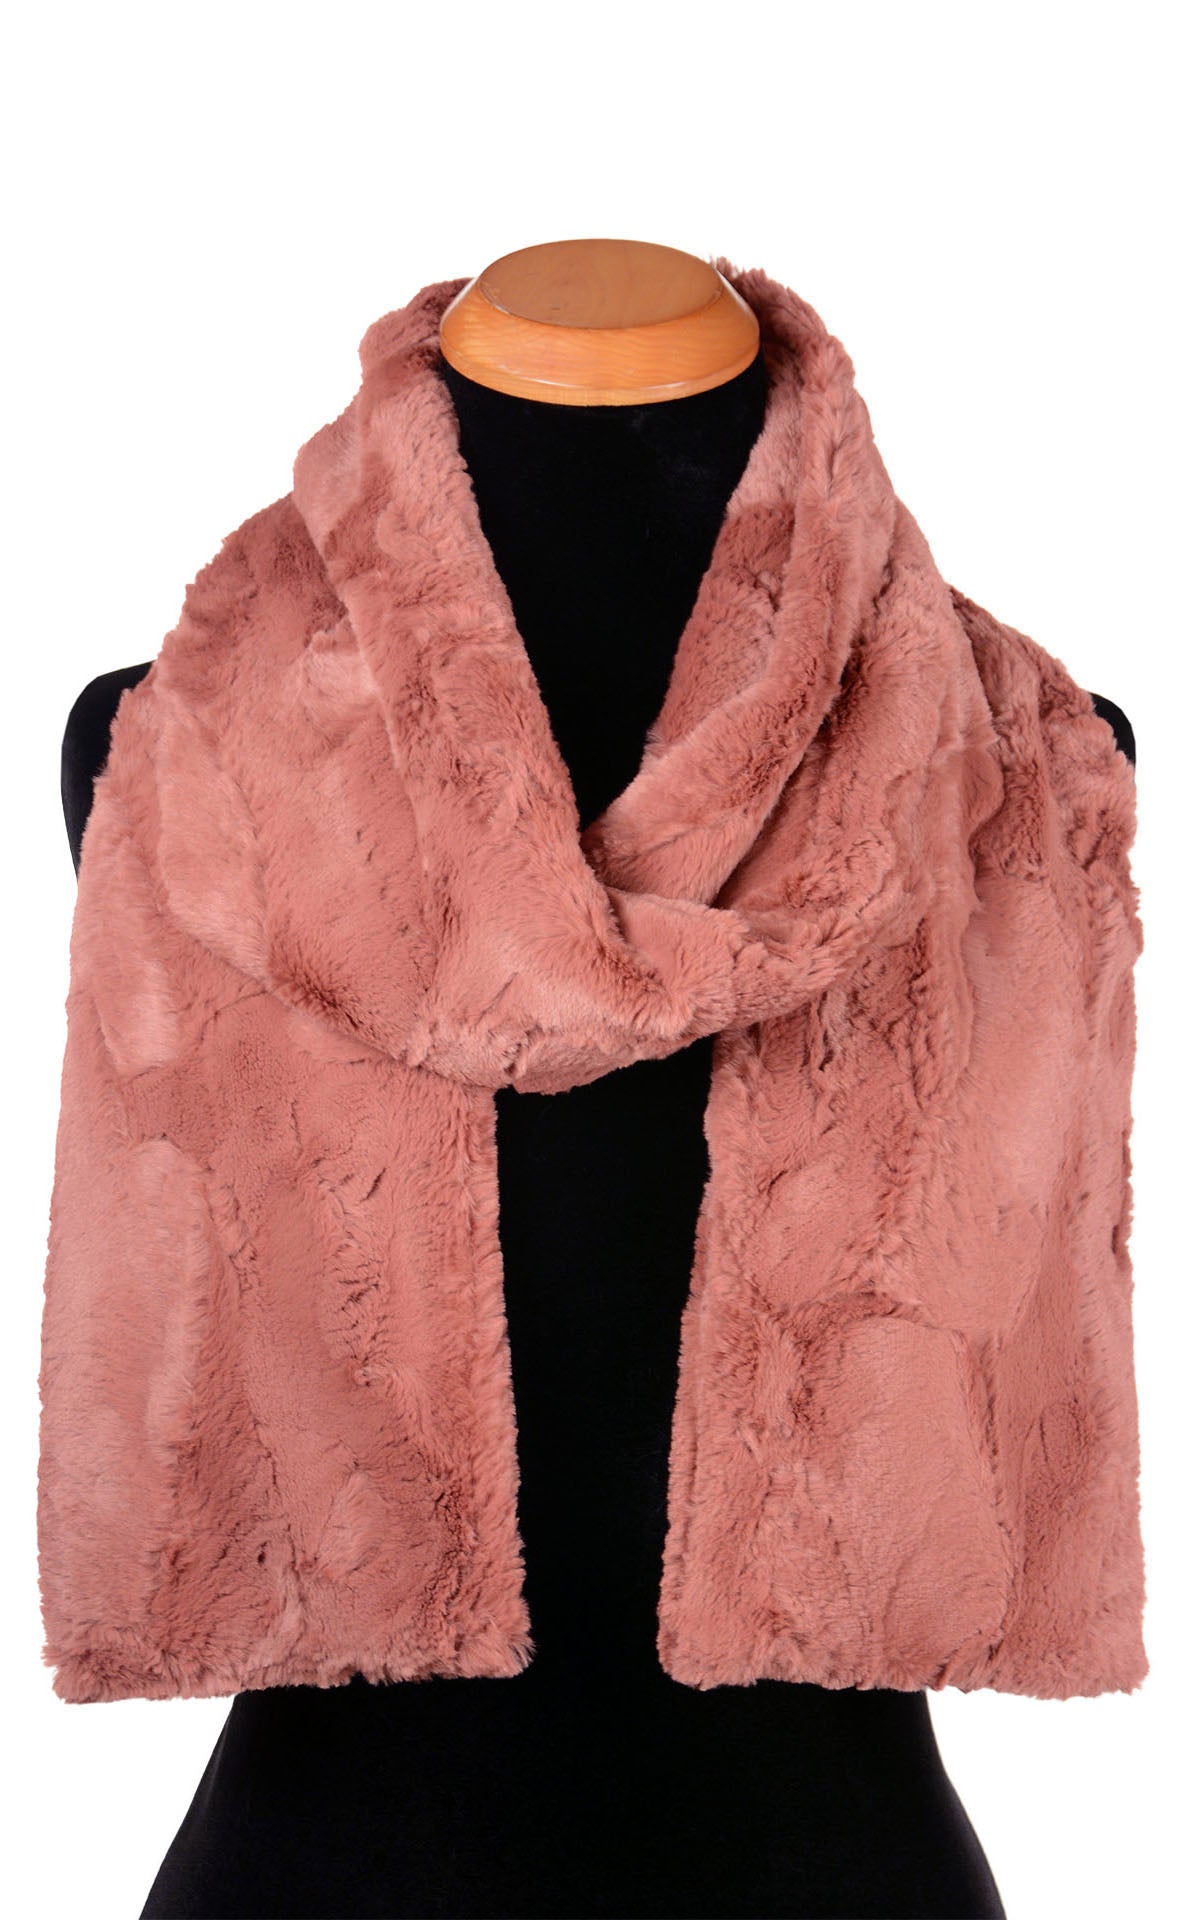 Classic Skinny Women's Scarf Cuddly Copper River Faux Fur in by Pandemonium Millinery